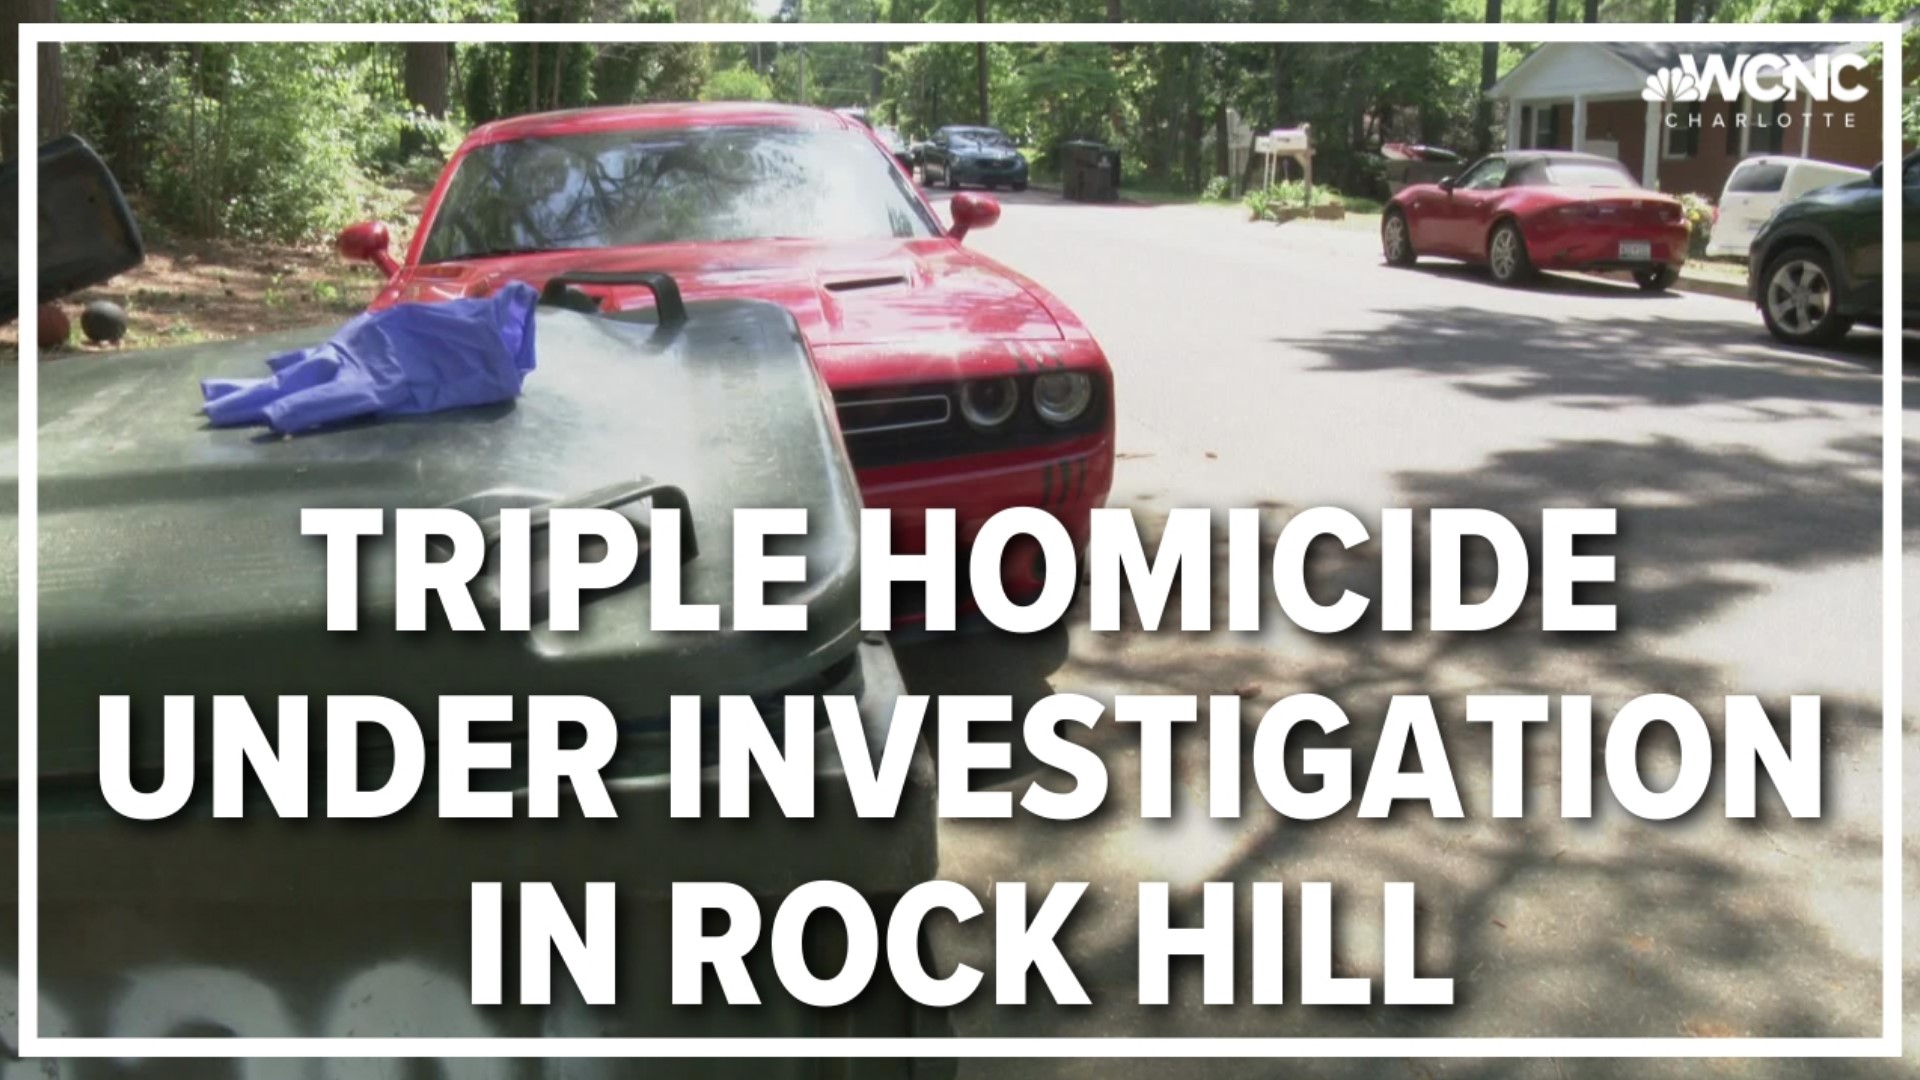 The Rock Hill Police Department is investigating a shooting that killed three people and injured a fourth.